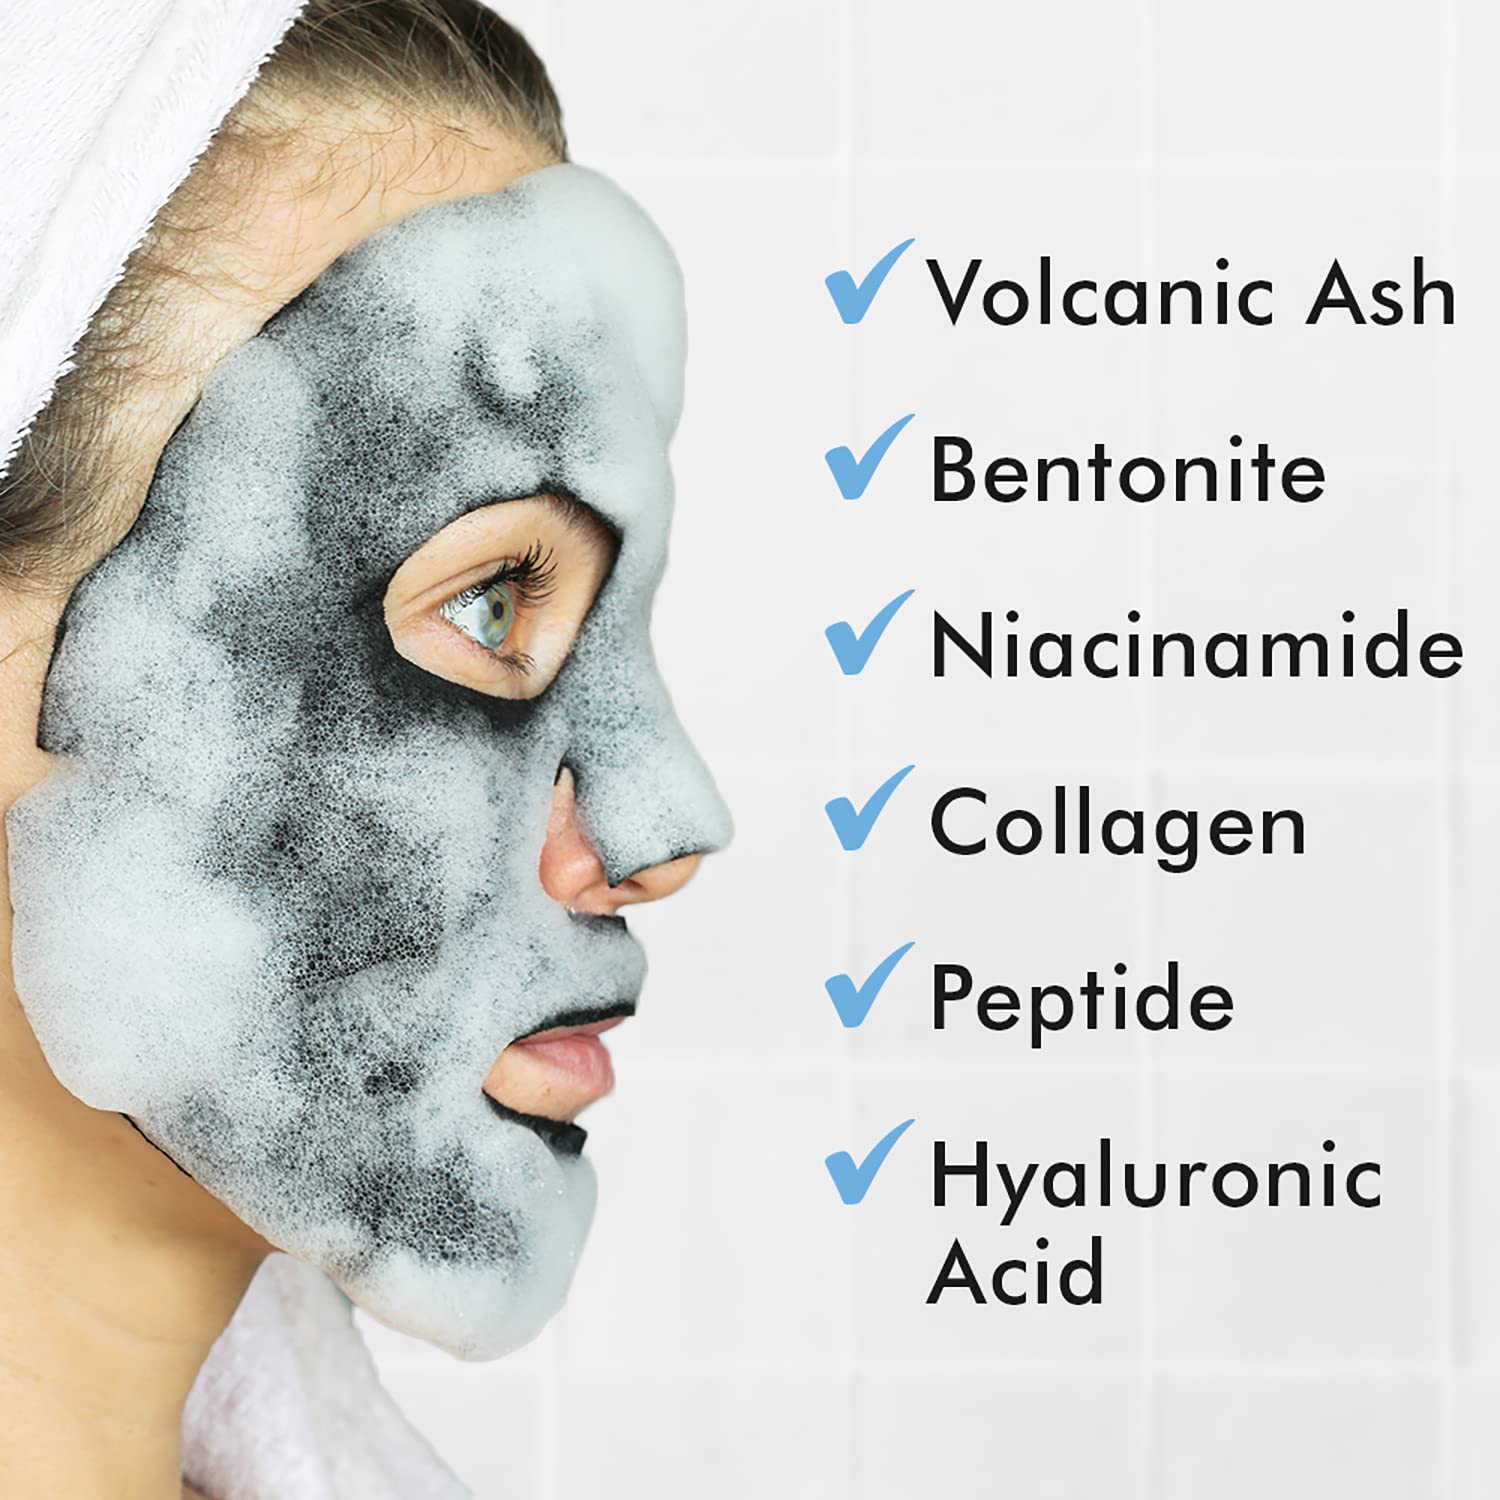 Ebanel Variety Face Mask Skin Care Set - 5 Pack Collagen Hydrating Face Masks, 2 Pack Hydrogel Mask, 2 Pack Carbonated Bubble Clay Detox Mask, and 3.52Oz Charcoal Peel Off Face Mask with Brush : Beauty & Personal Care